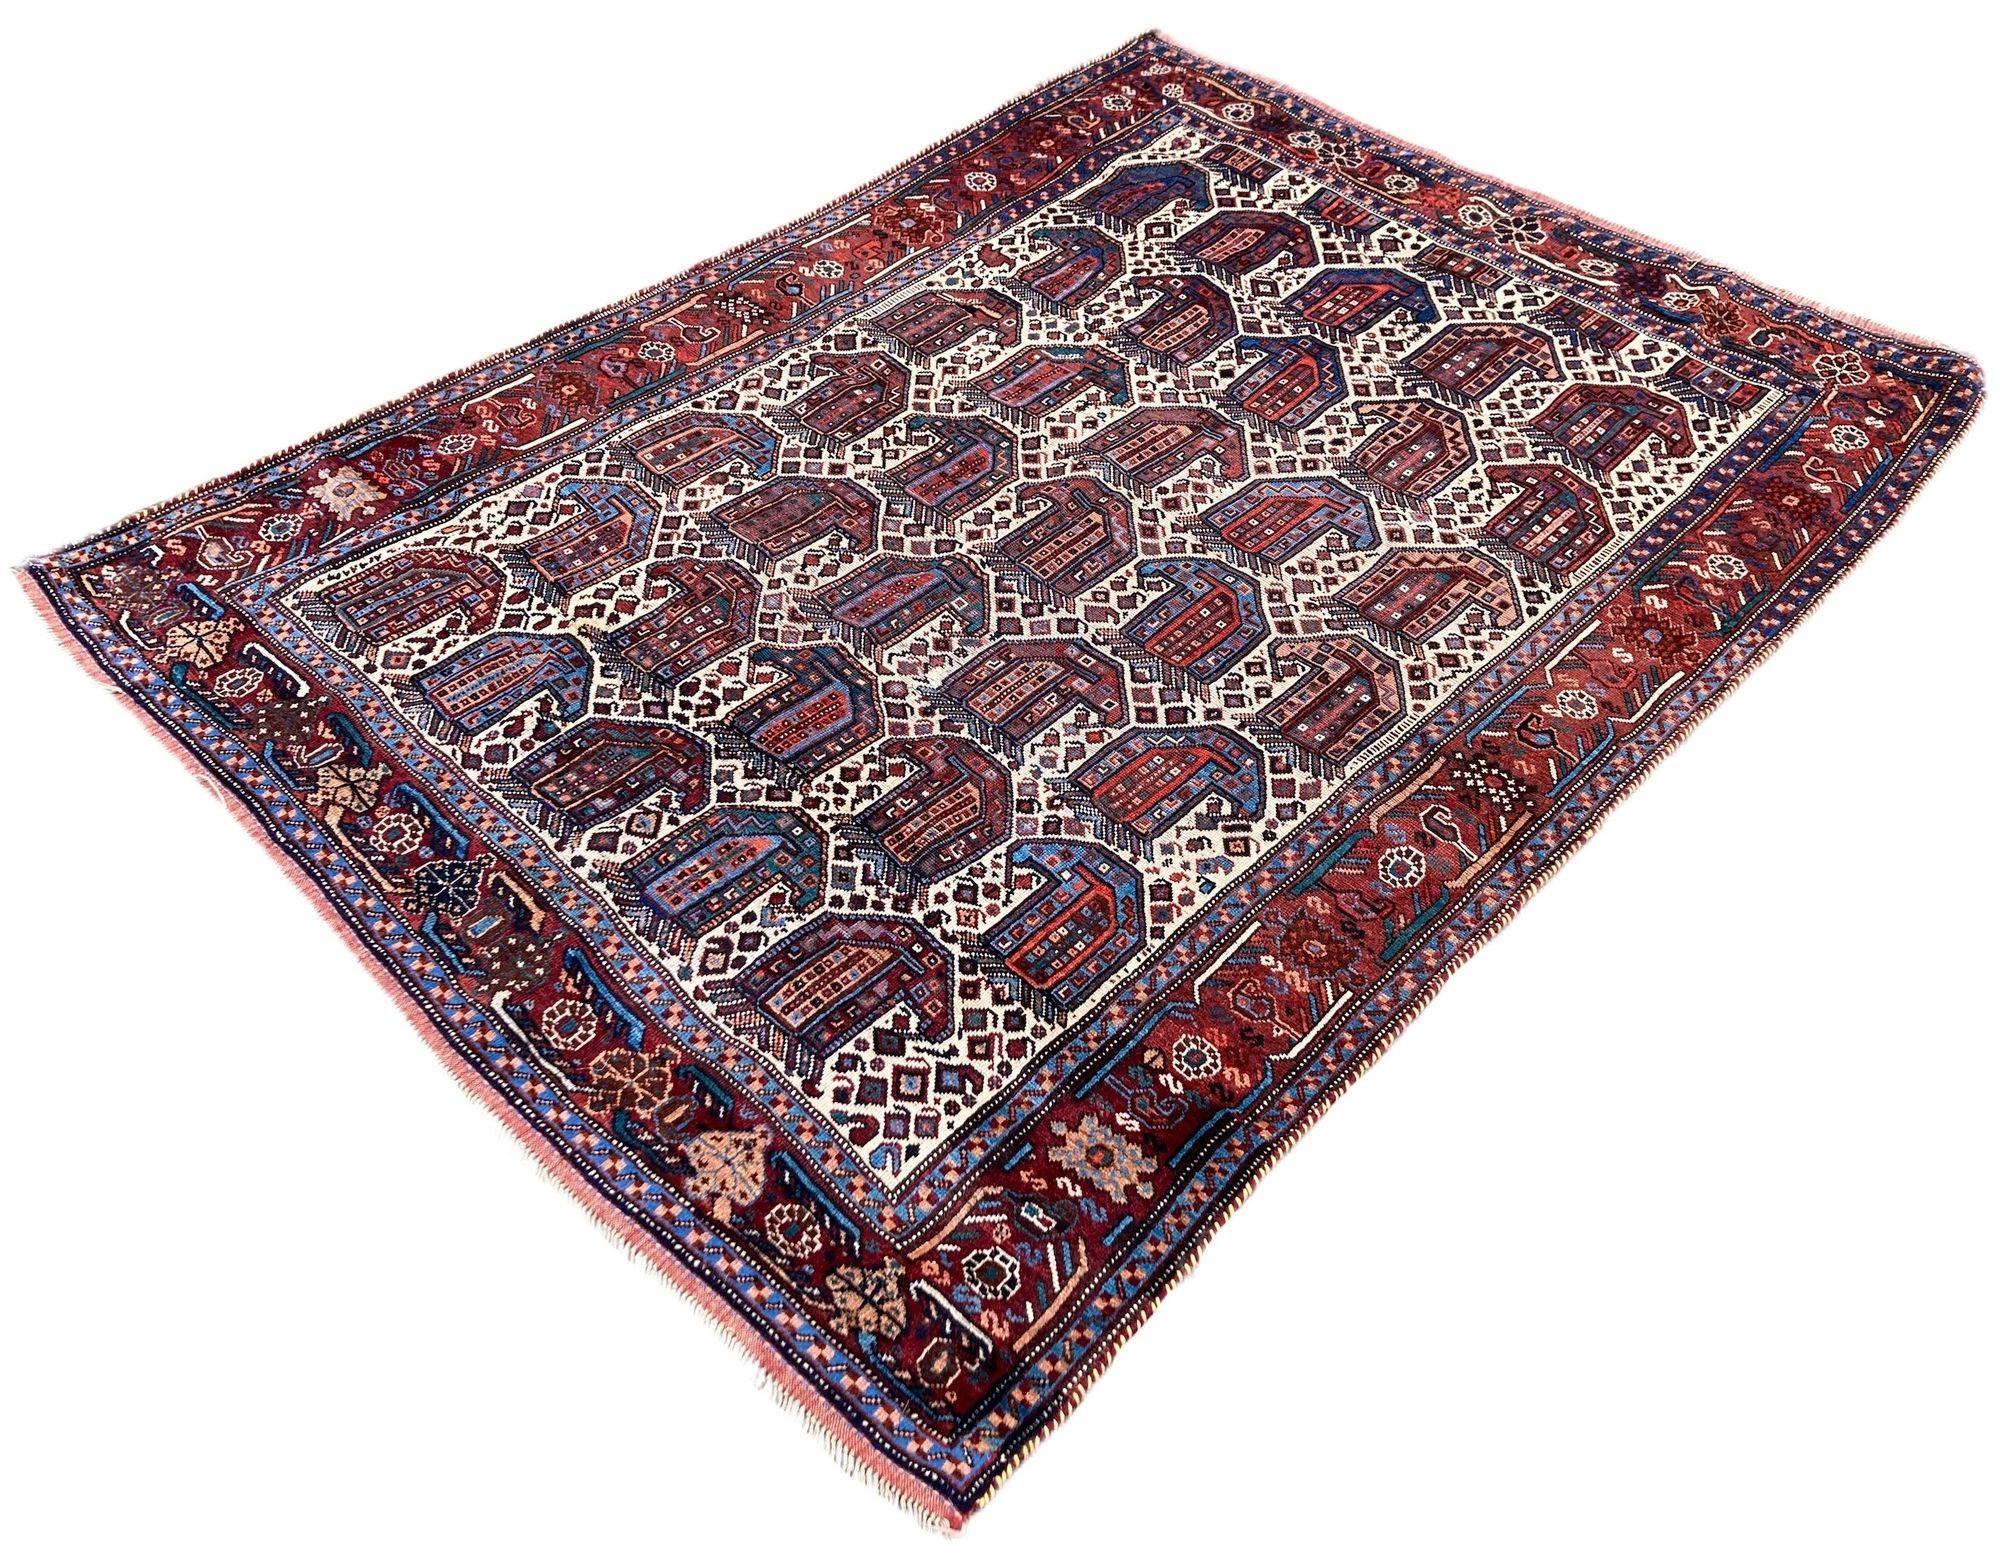 Antique Khamseh Rug 1.90m x 1.39m In Good Condition For Sale In St. Albans, GB